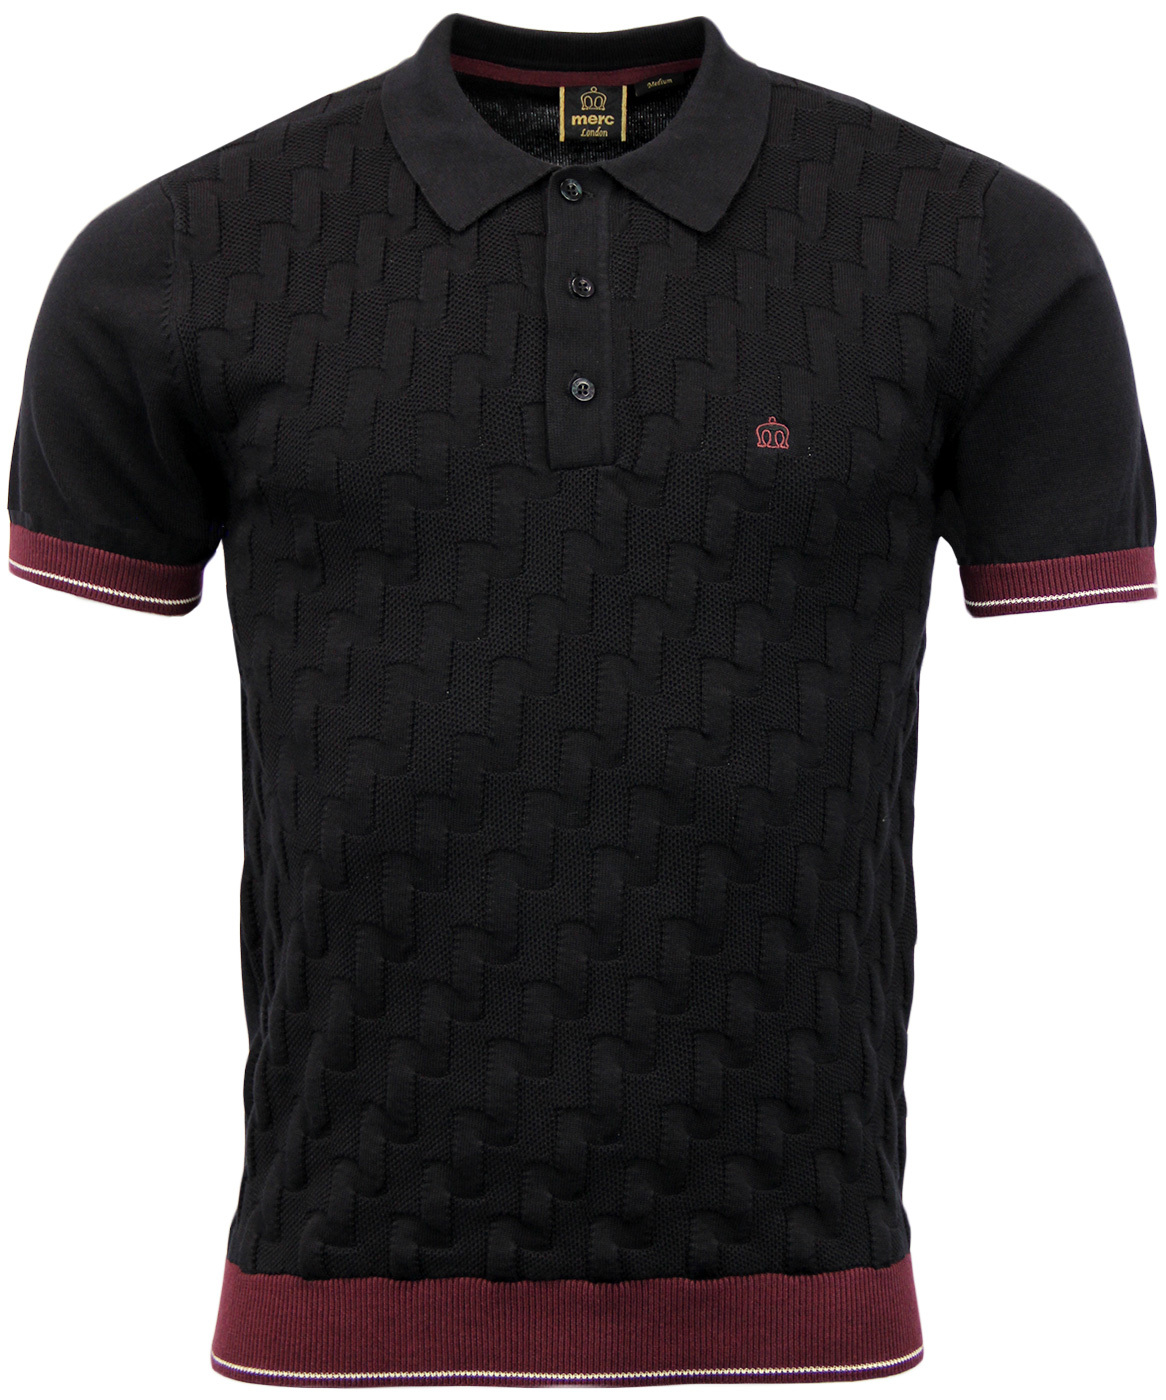 MERC Haxby Retro Sixties Mod Jacquard Knitted Polo in Black